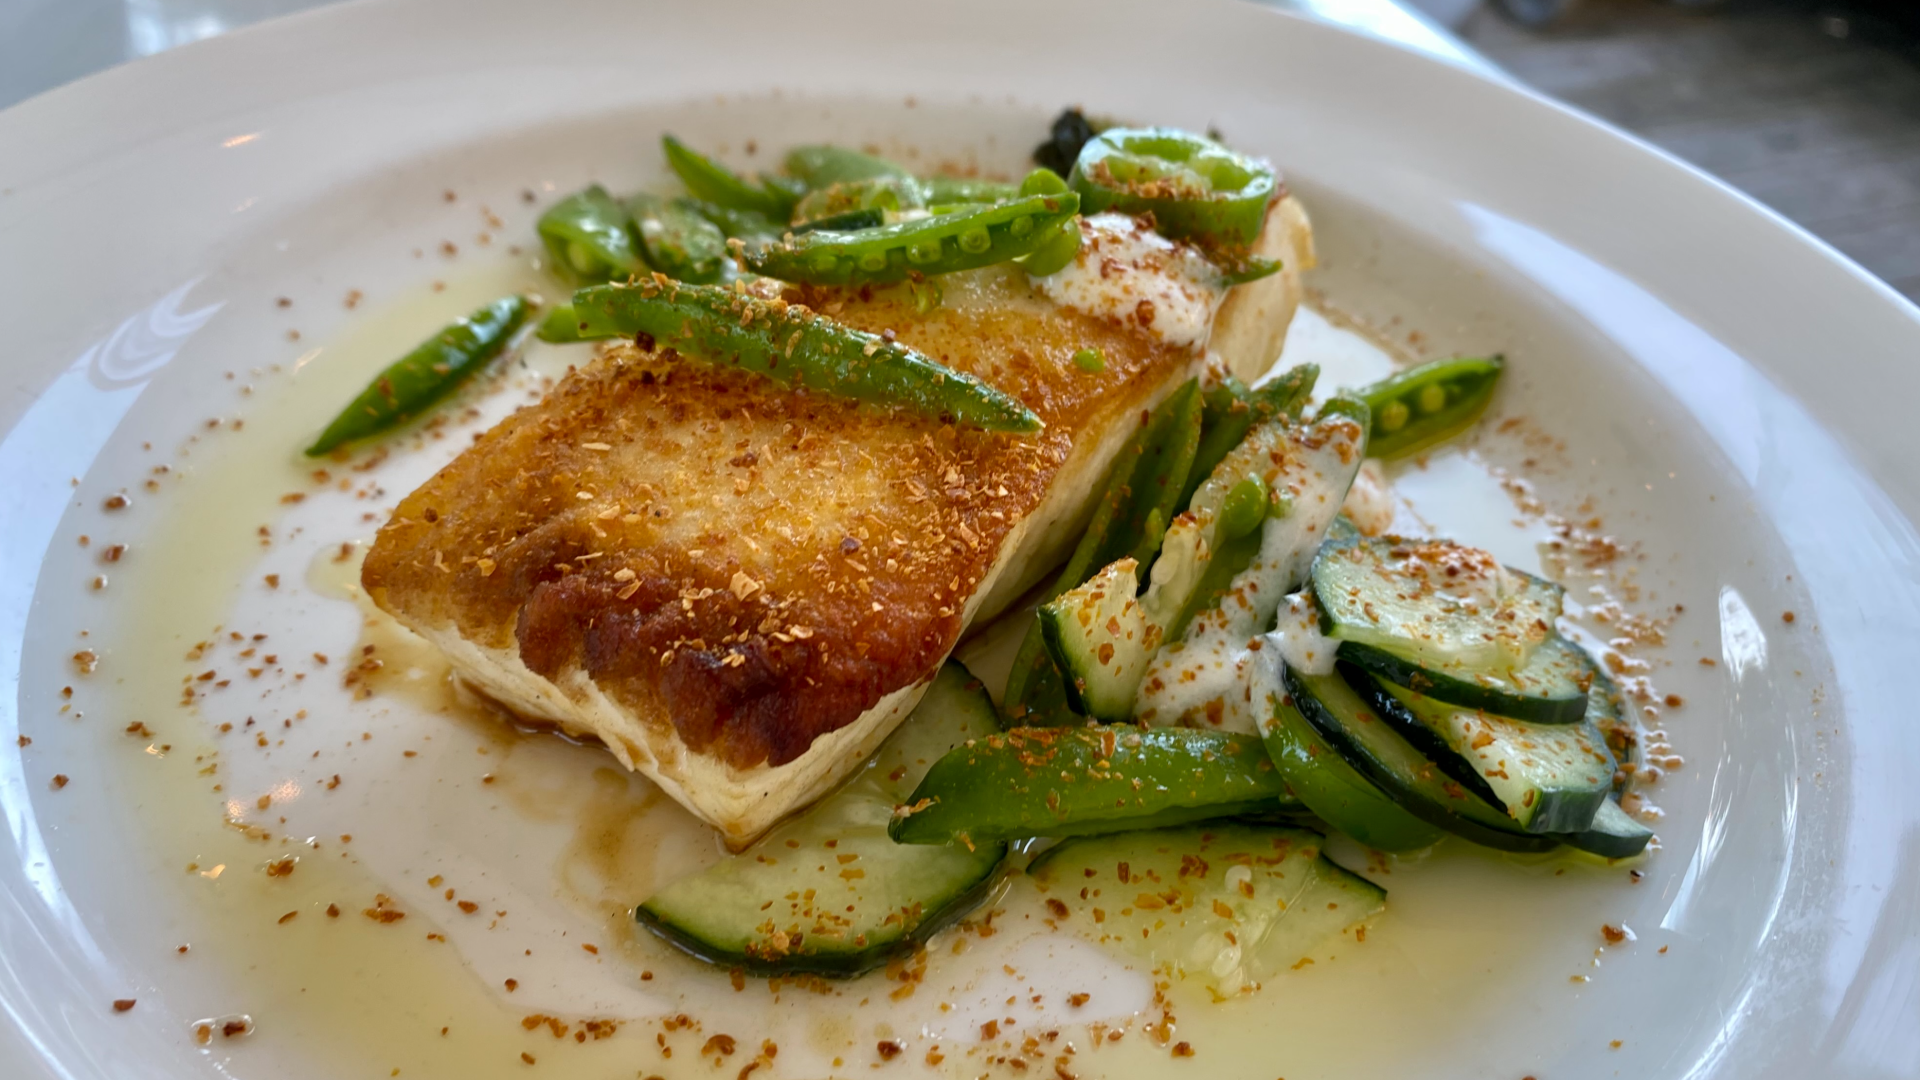 Halibut resting on a bed of vegetables with a sauce on a white plate.